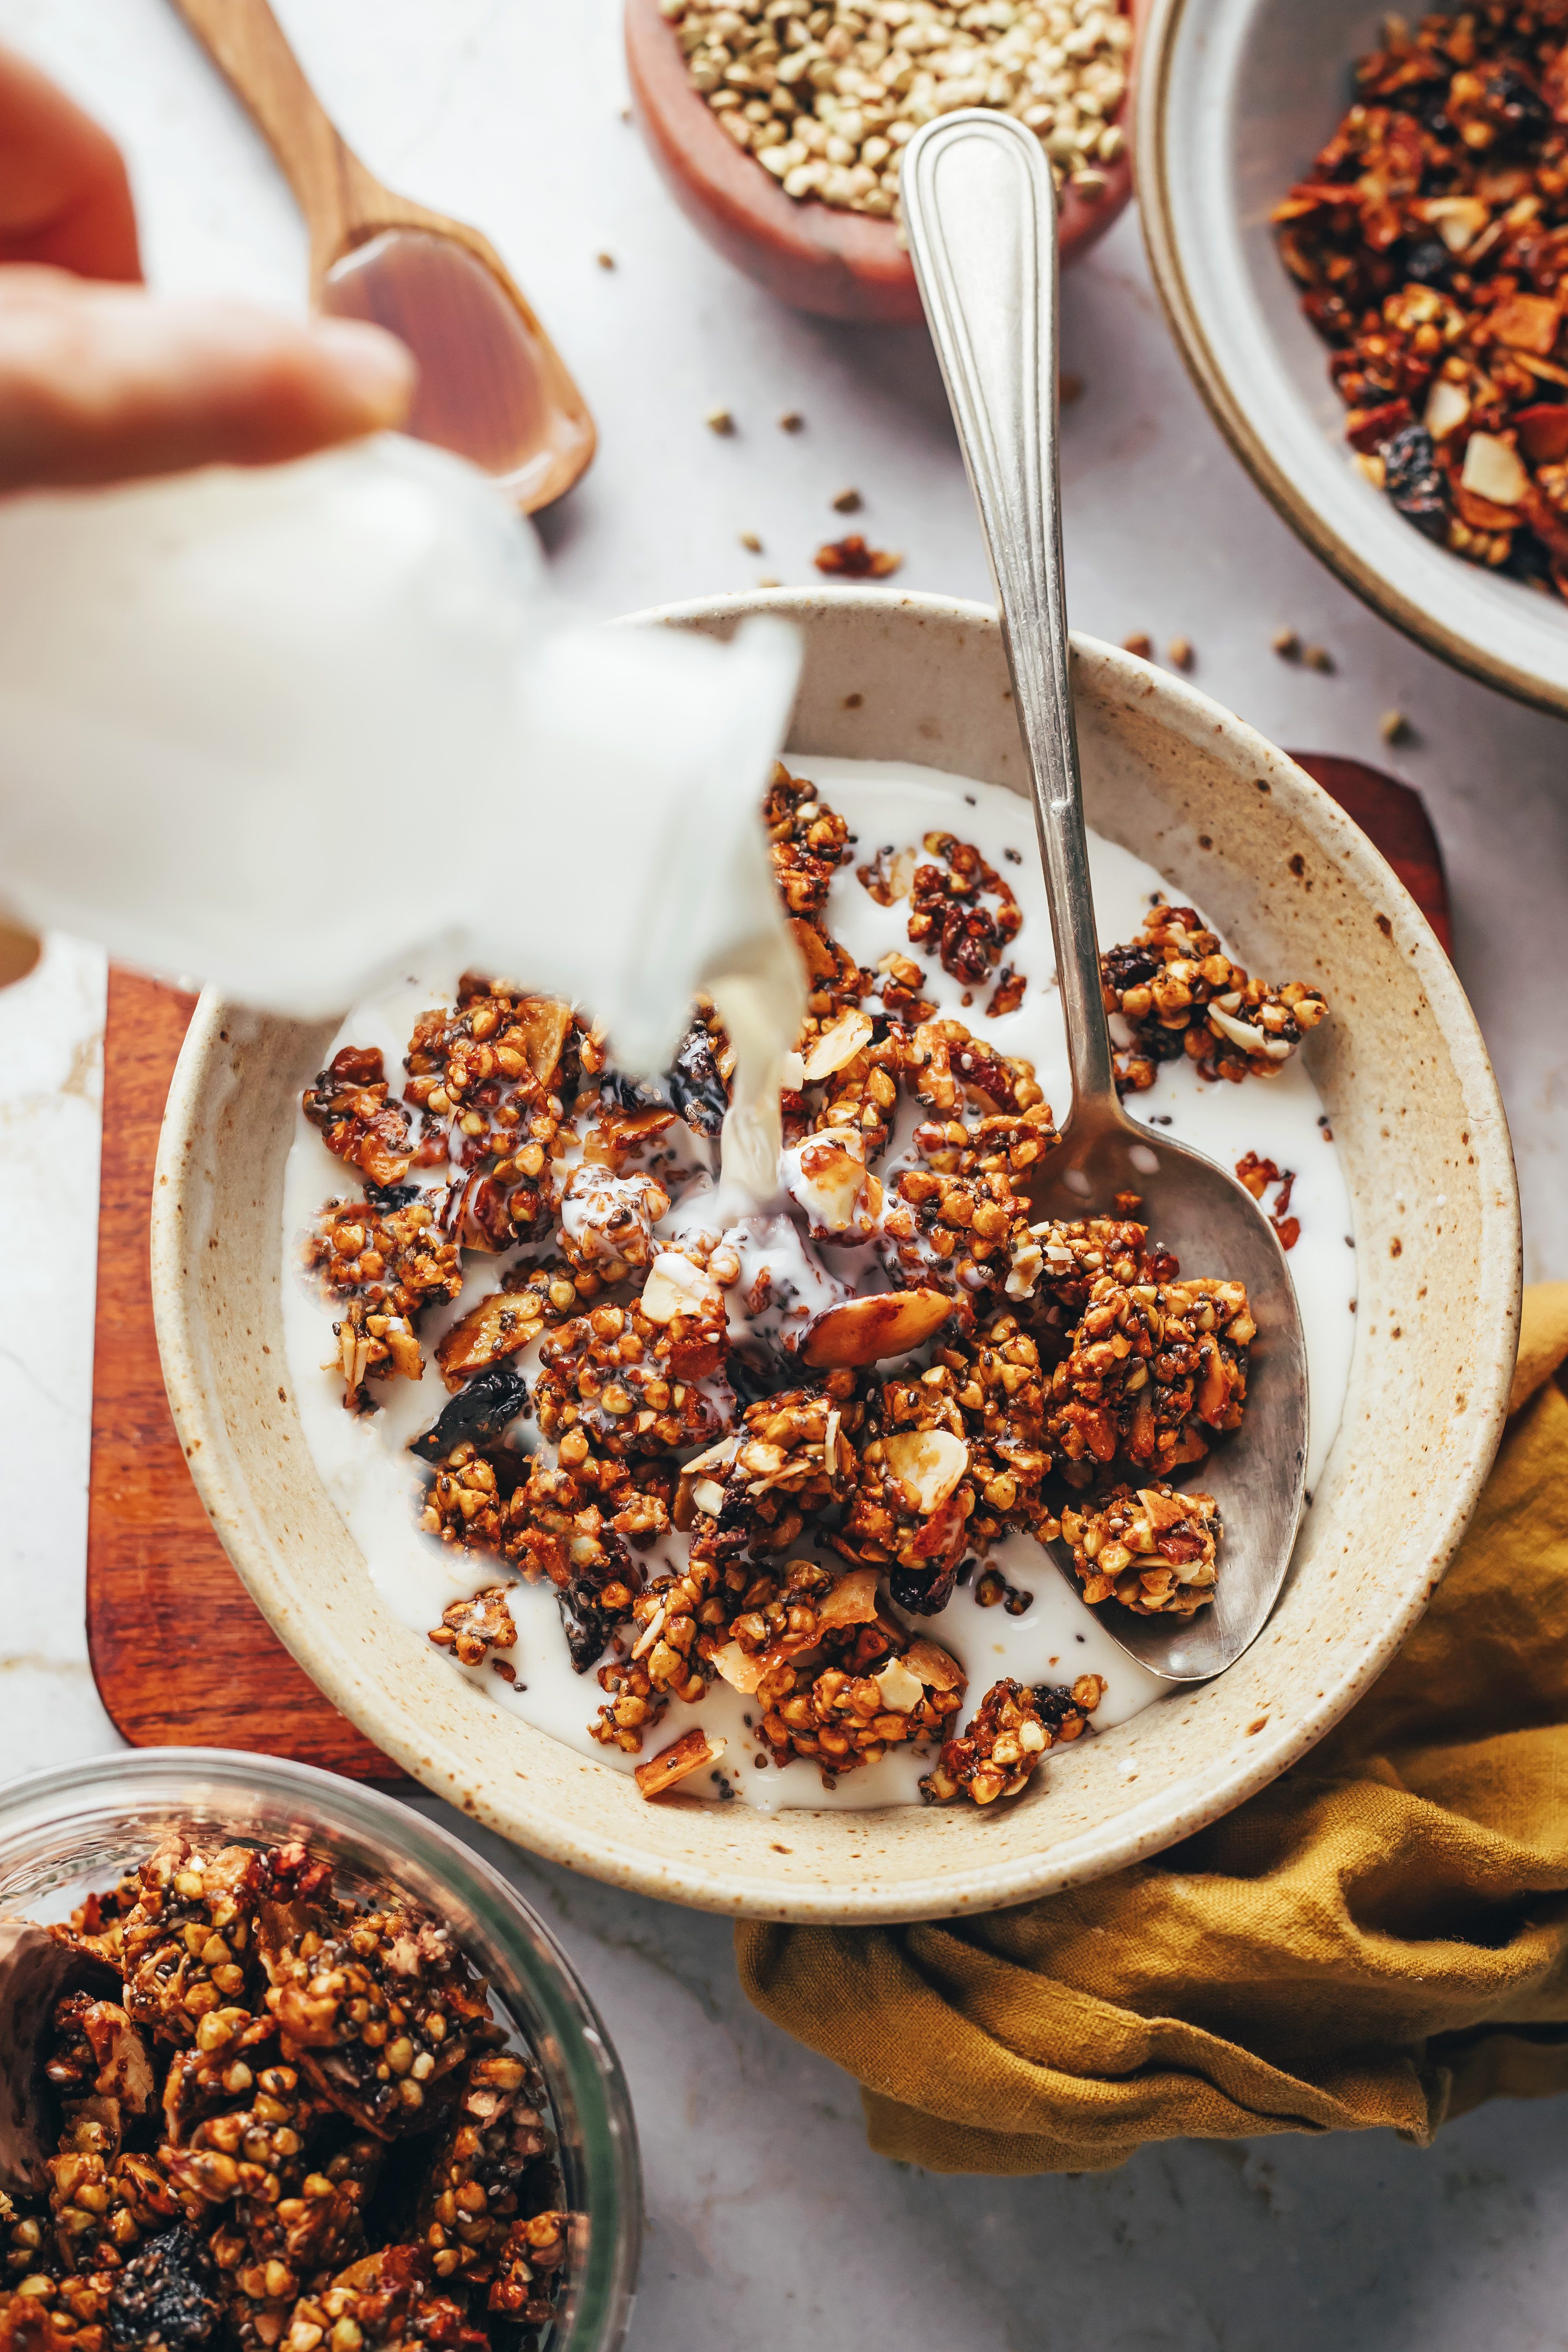 Pouring dairy-free milk into a bowl of oat-free buckwheat granola